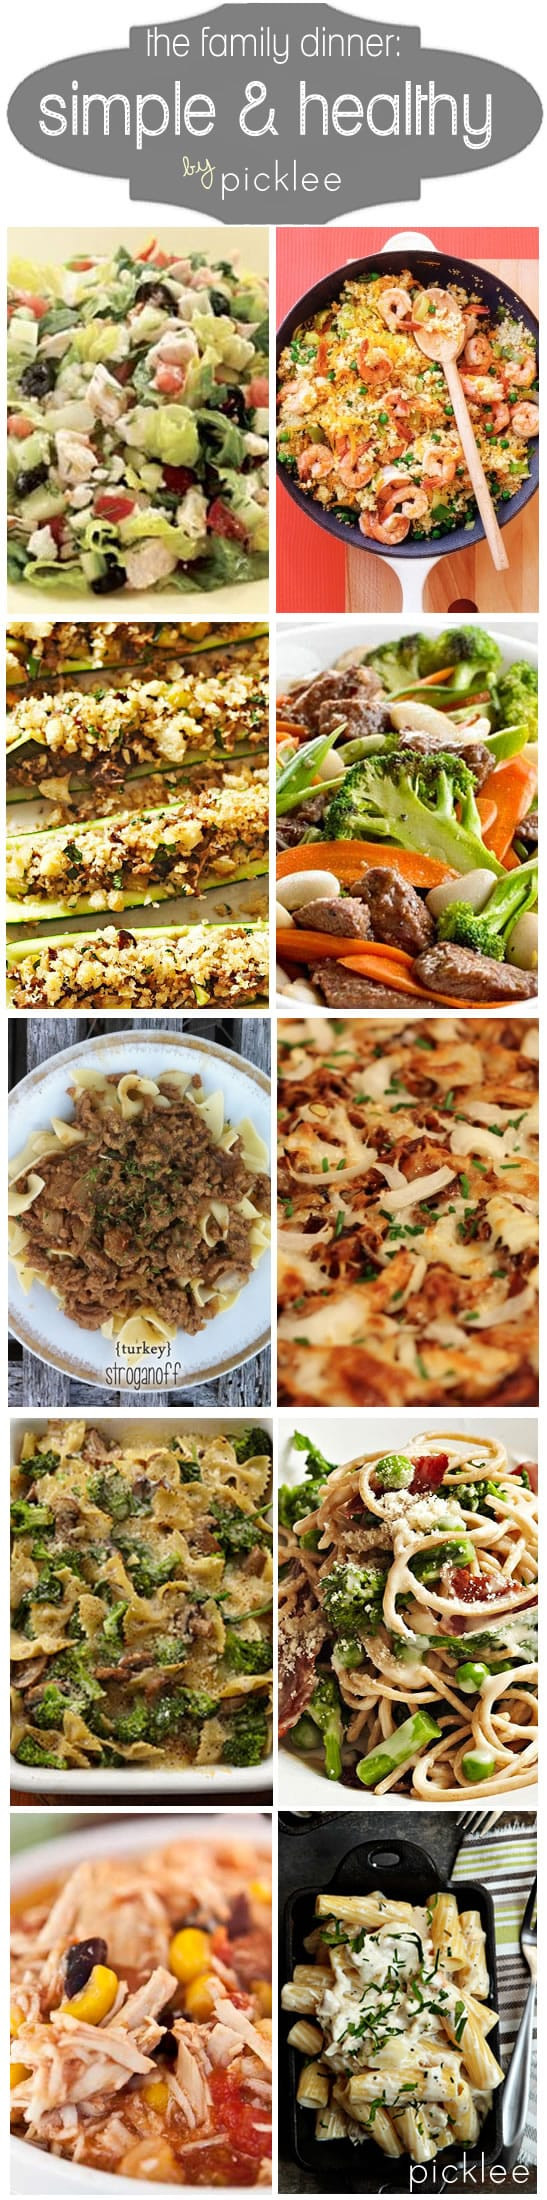 Quick Healthy Family Dinners
 10 Simple & Healthy Weeknight Dinners [recipes] Picklee